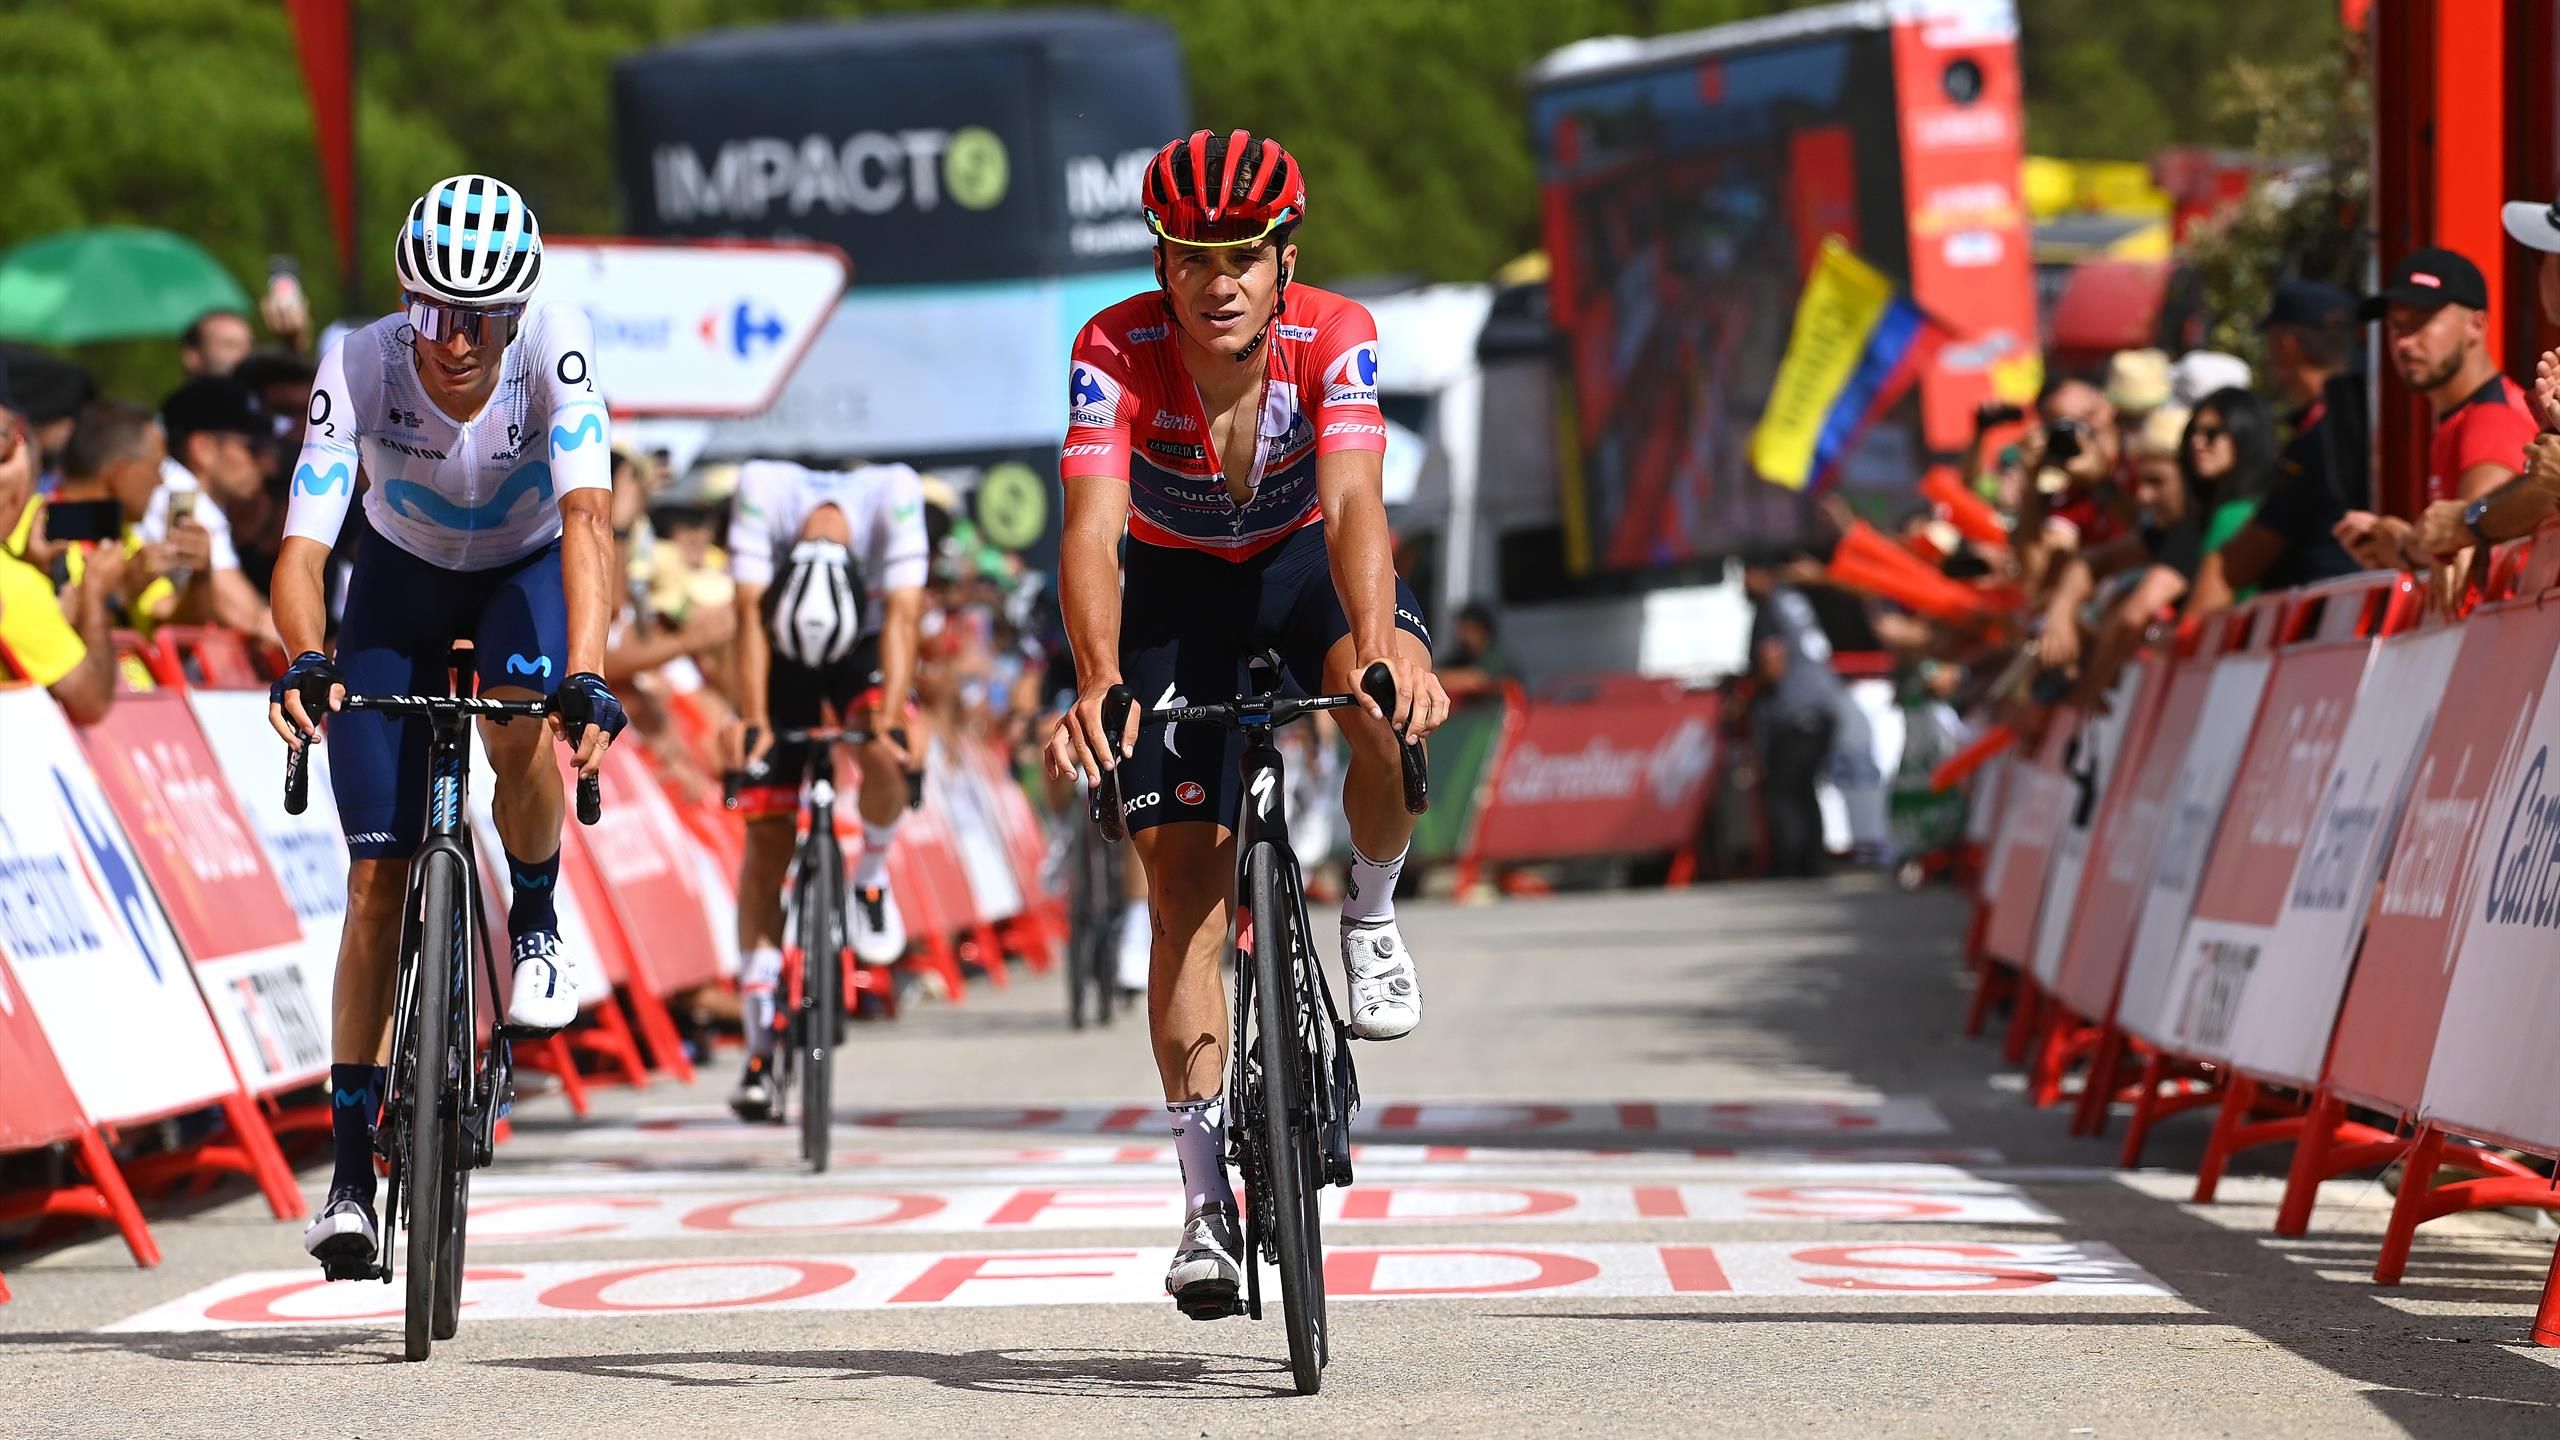 La Vuelta 2022 - How to watch Stage 18 on Thursday, TV and live stream details, timings and route map